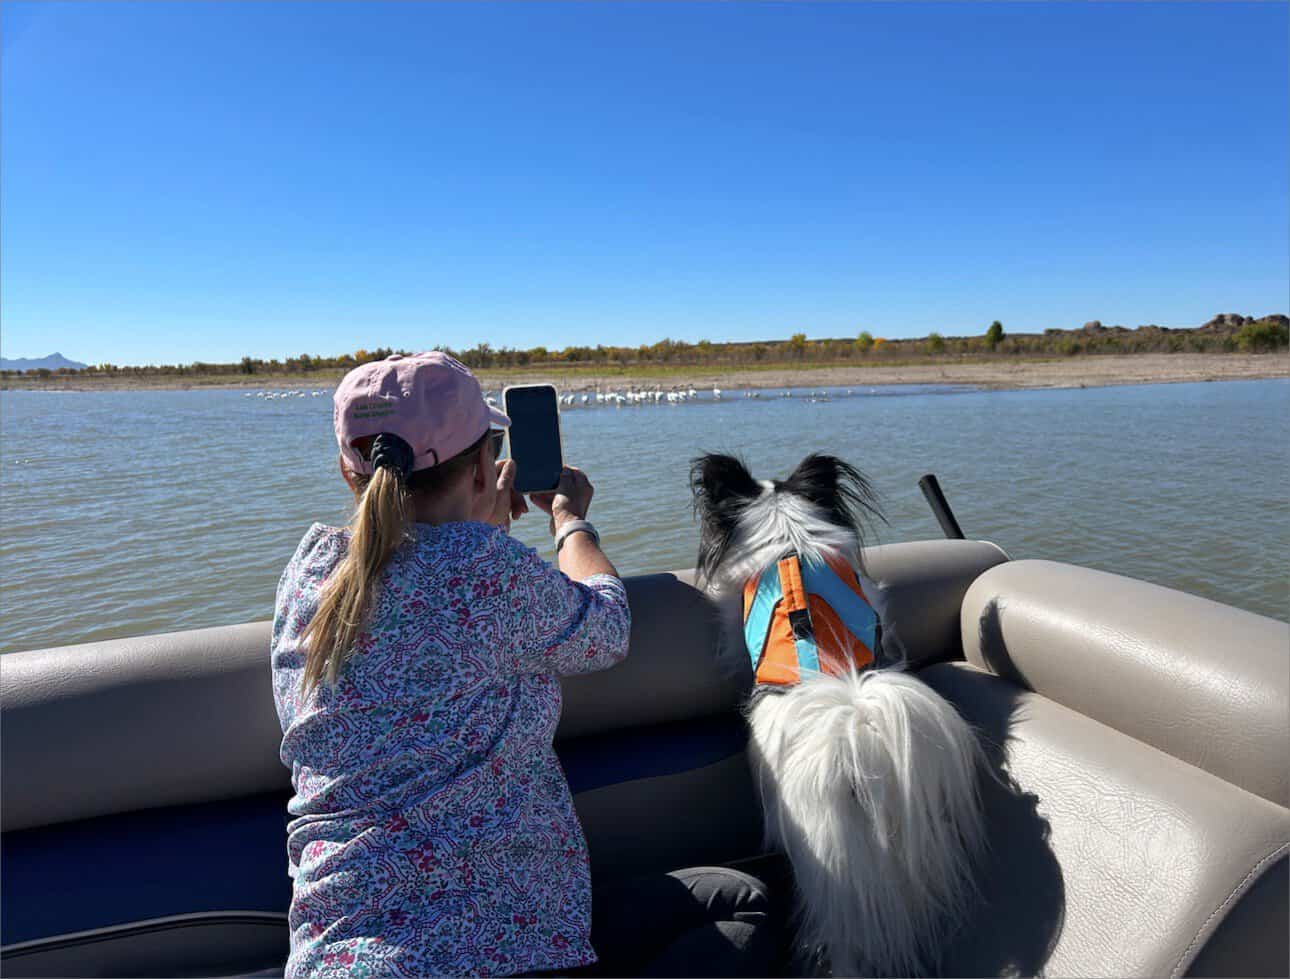 A woman is capturing a photo of her dog while boating on a lake in New Mexico